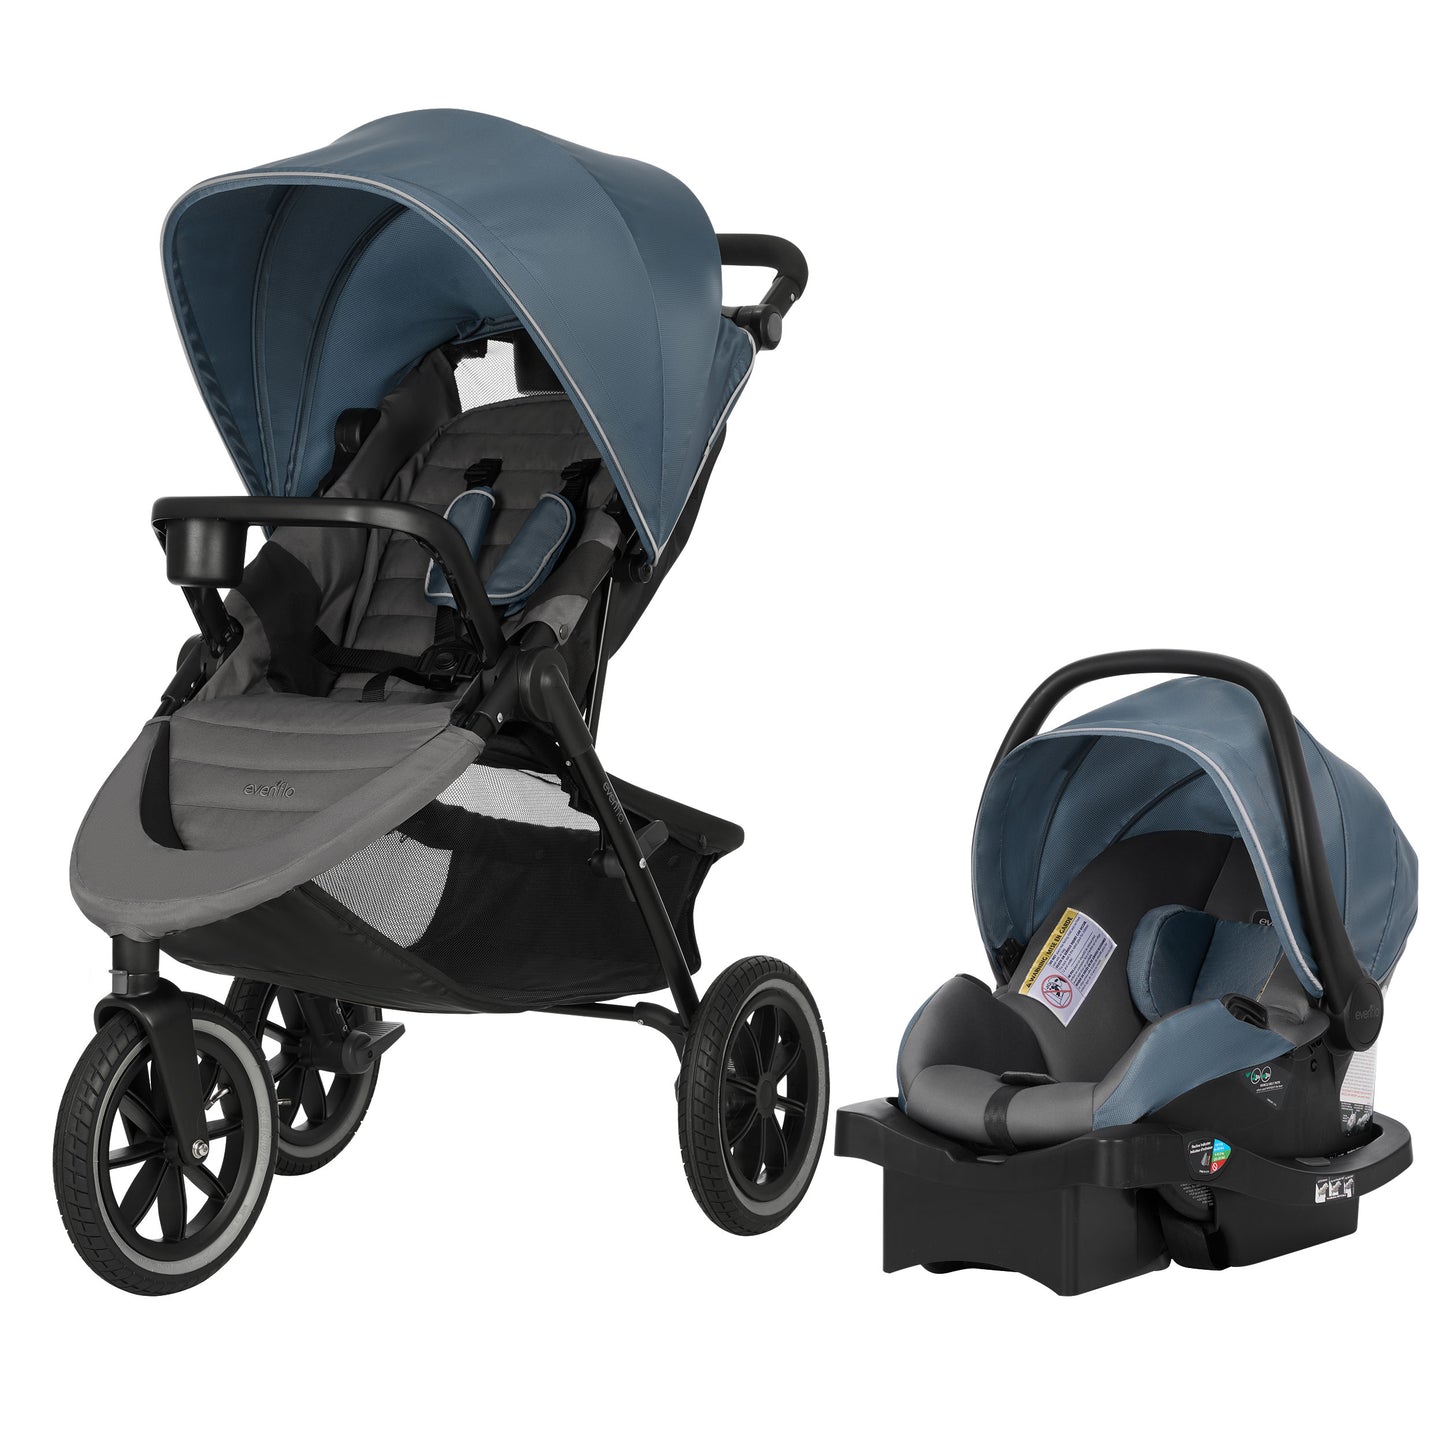 Folio3 Jog & Stroll Travel System with LiteMax Infant Car Seat Support